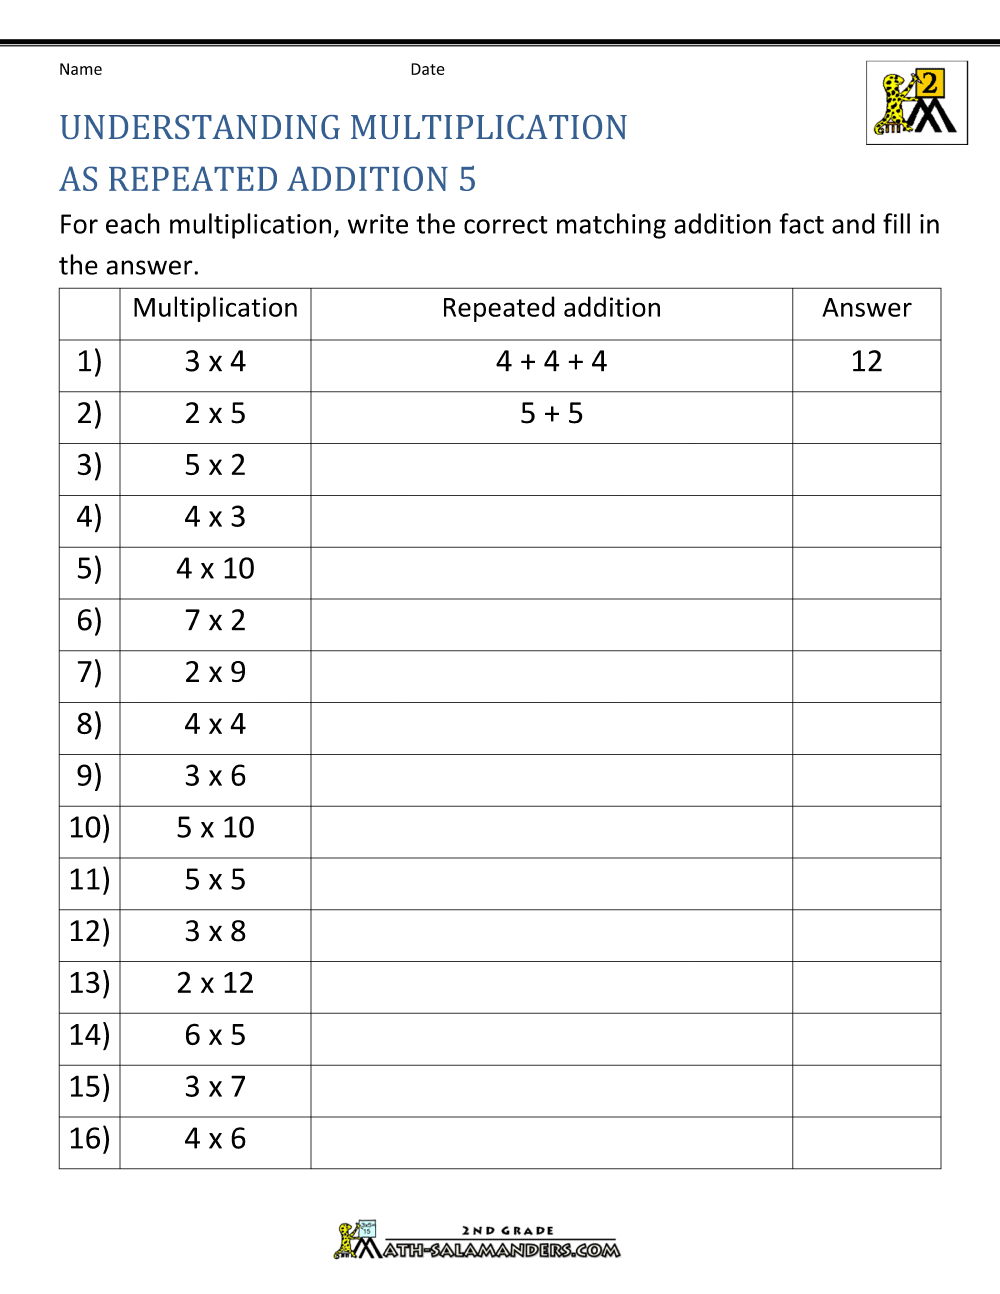 multiplication-repeated-addition-worksheet